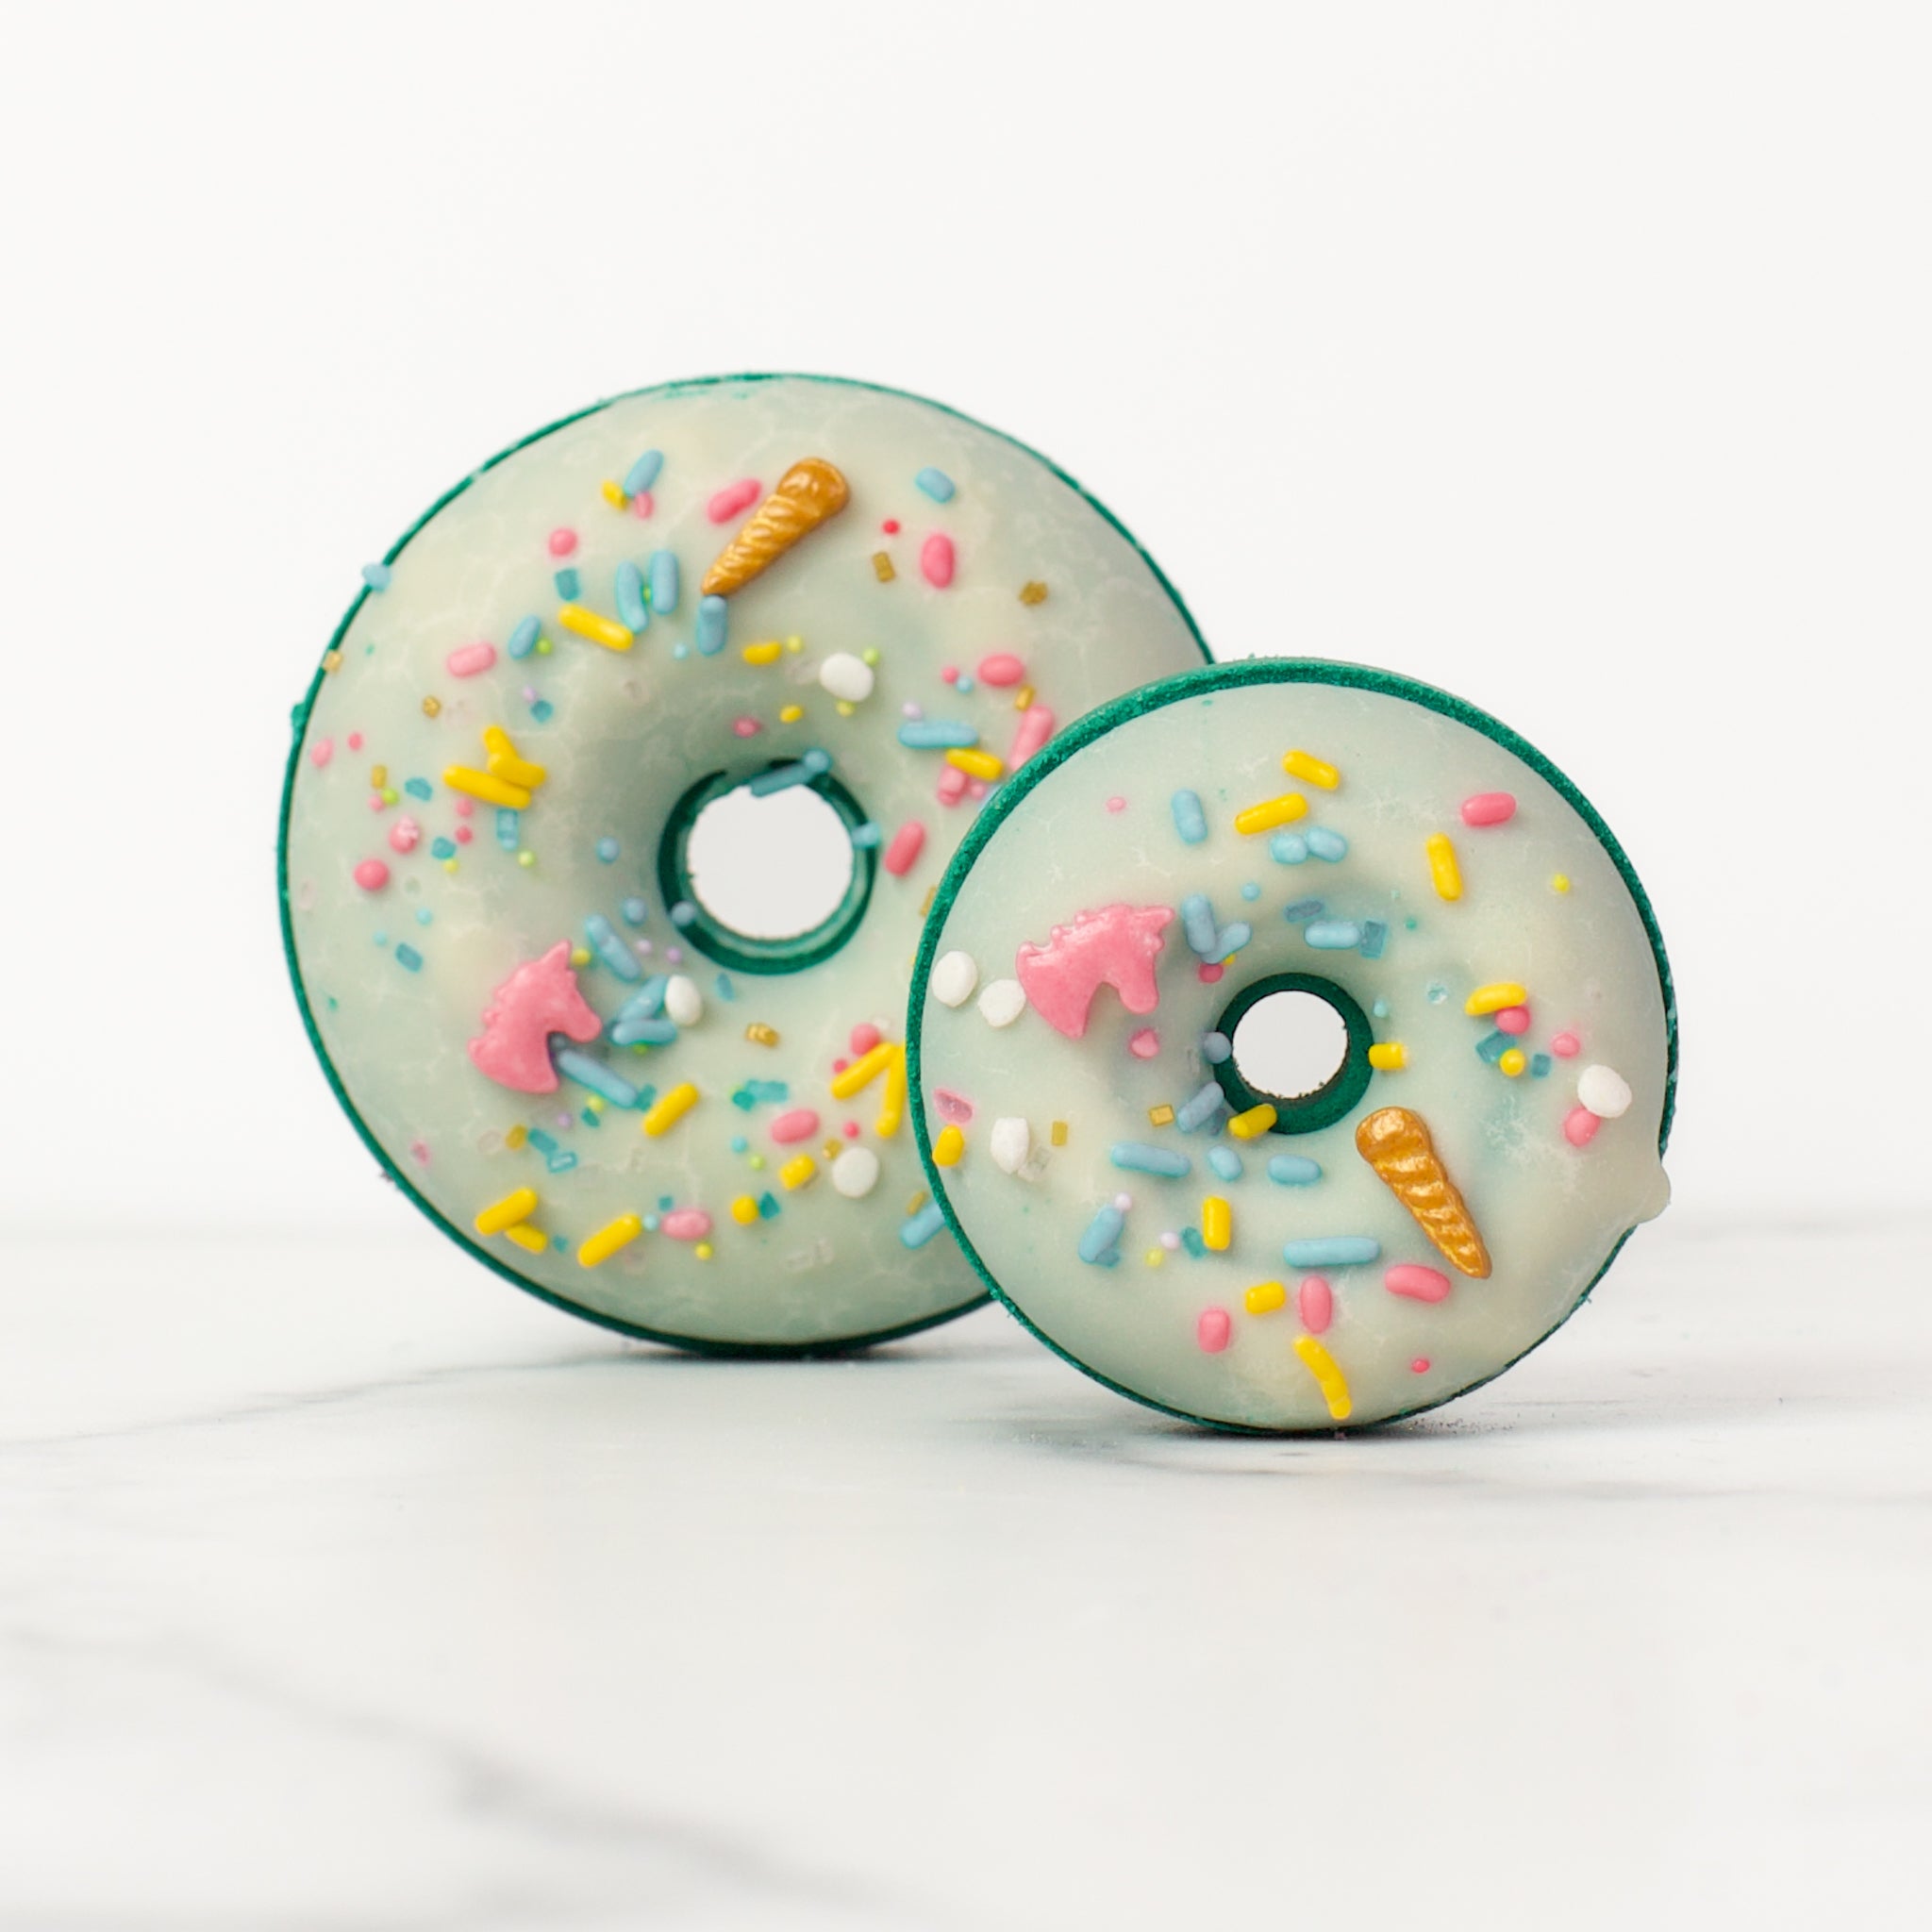 One large and one small donut Volcano bath bombs on a white background. Volcano is a teal bath bomb with a white glaze and pastel unicorn sprinkles.